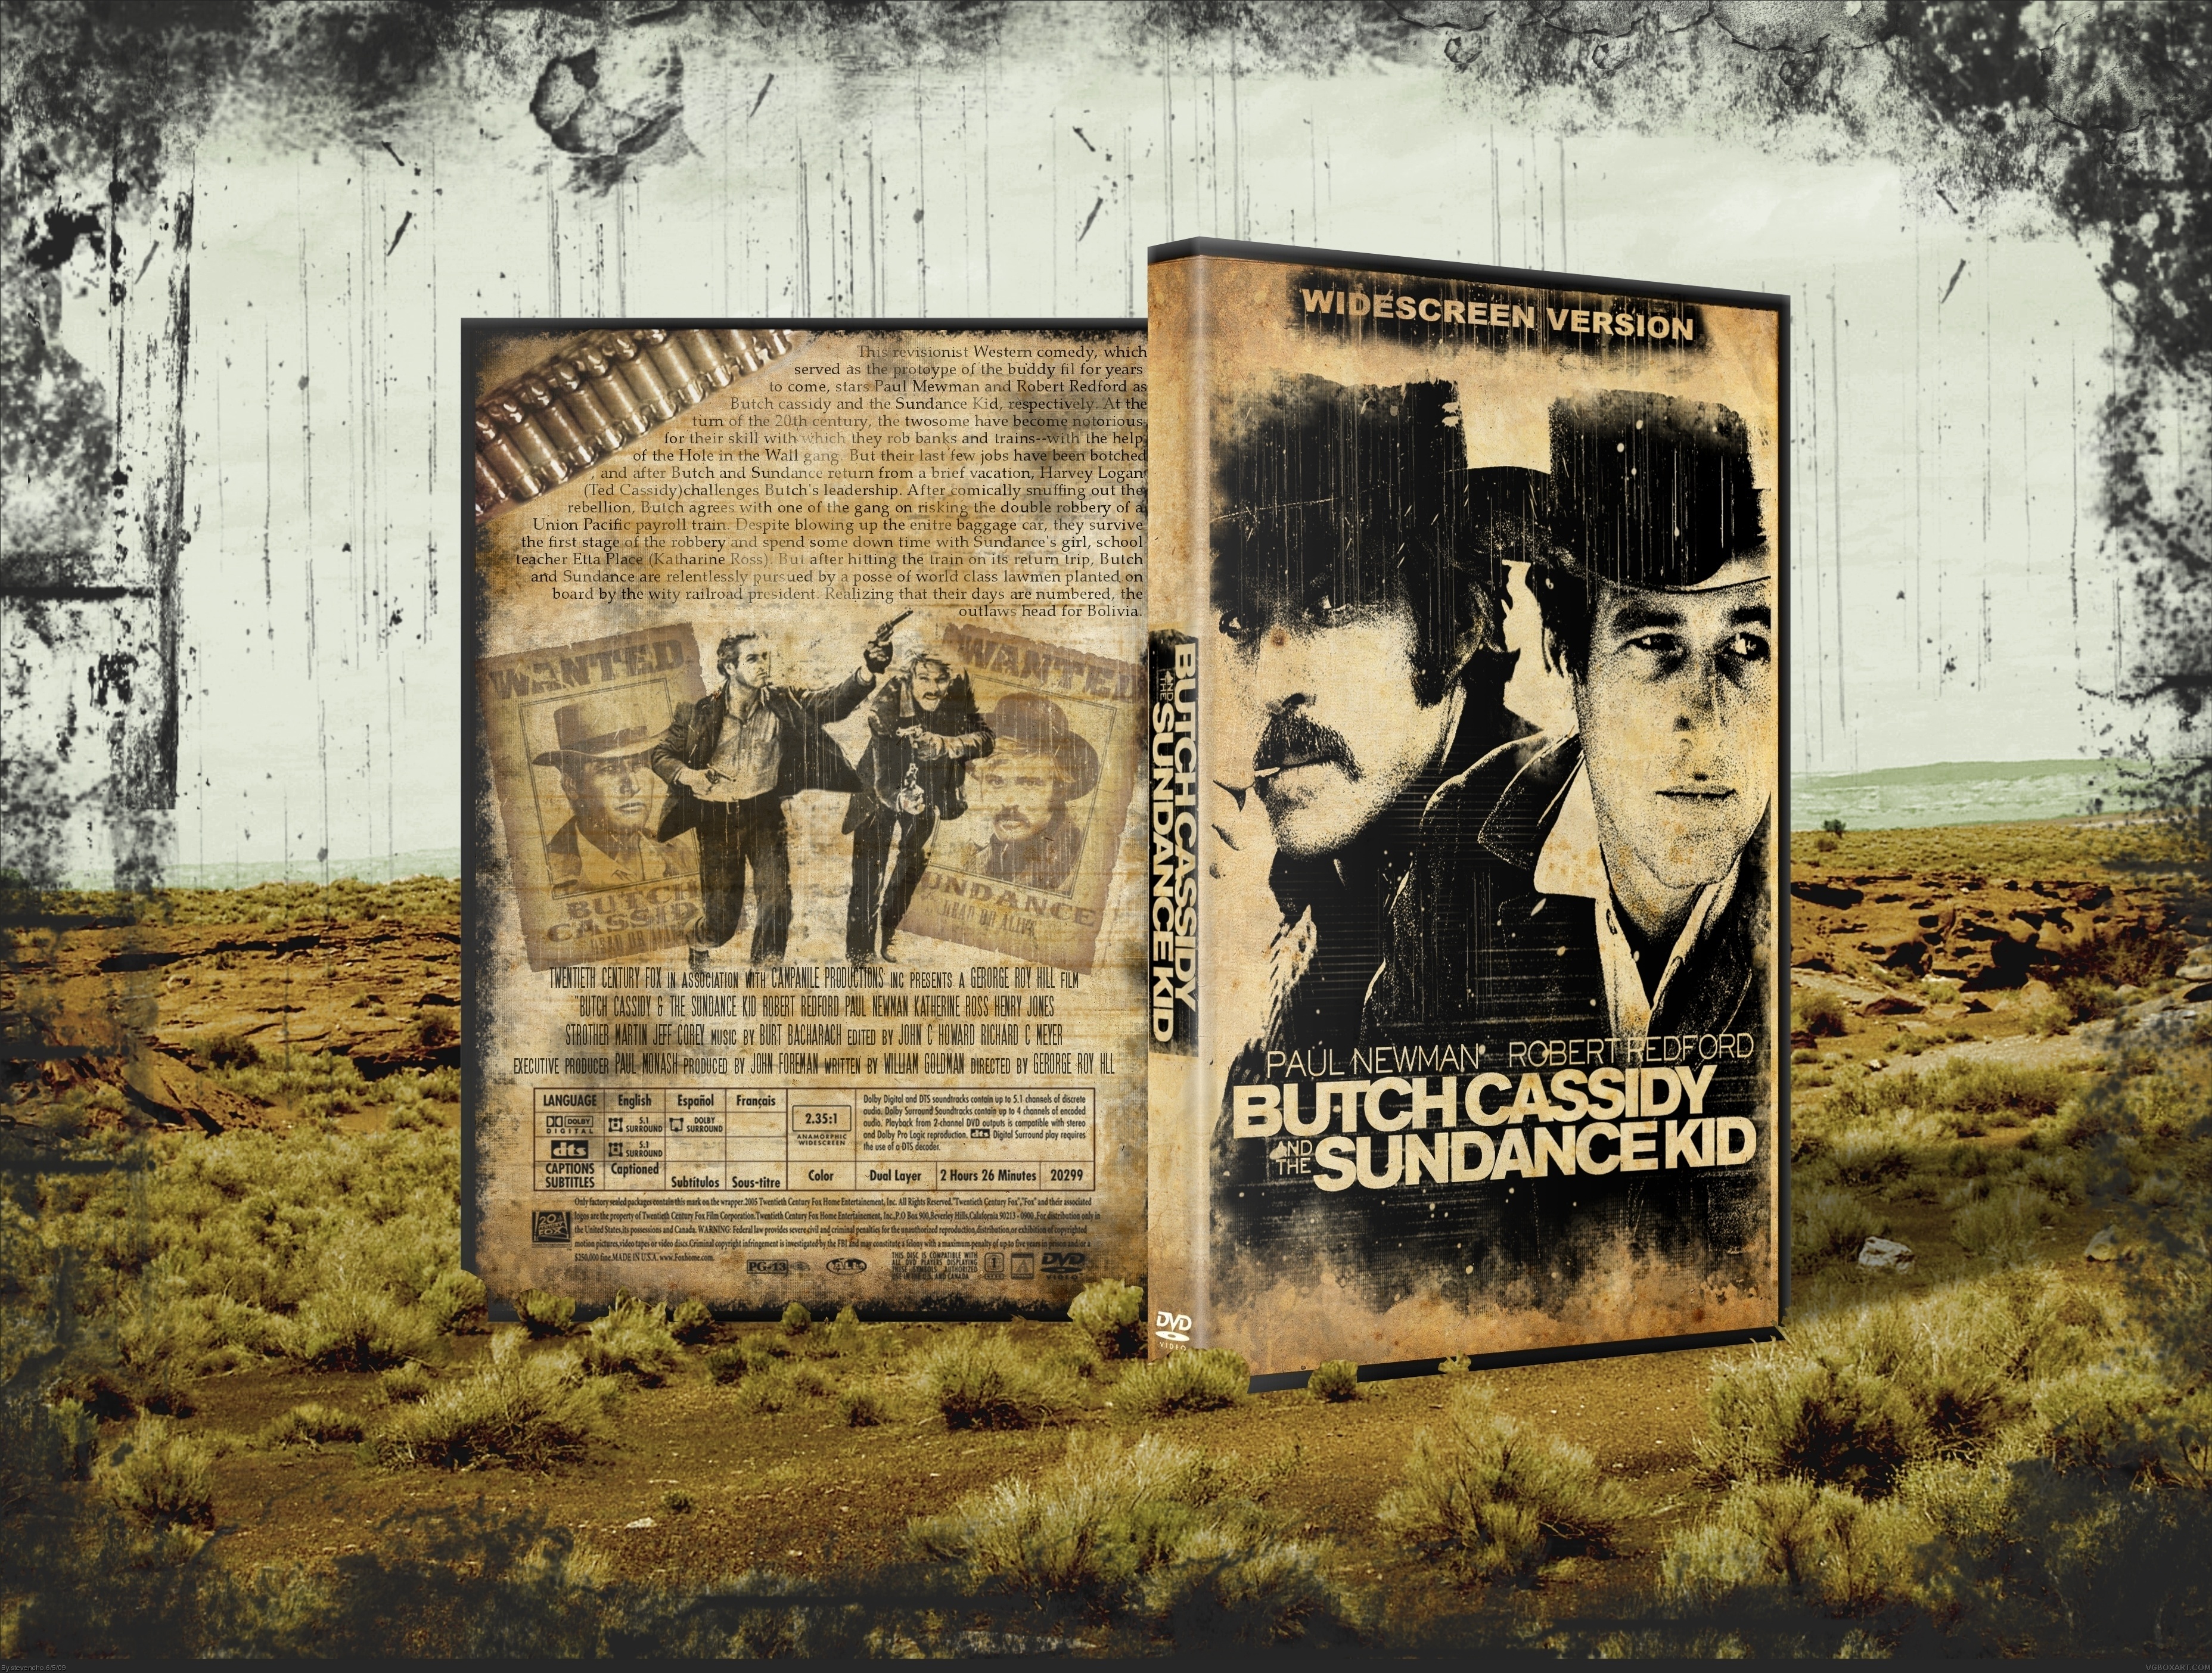 Butch Cassidy and the Sundance Kid box cover